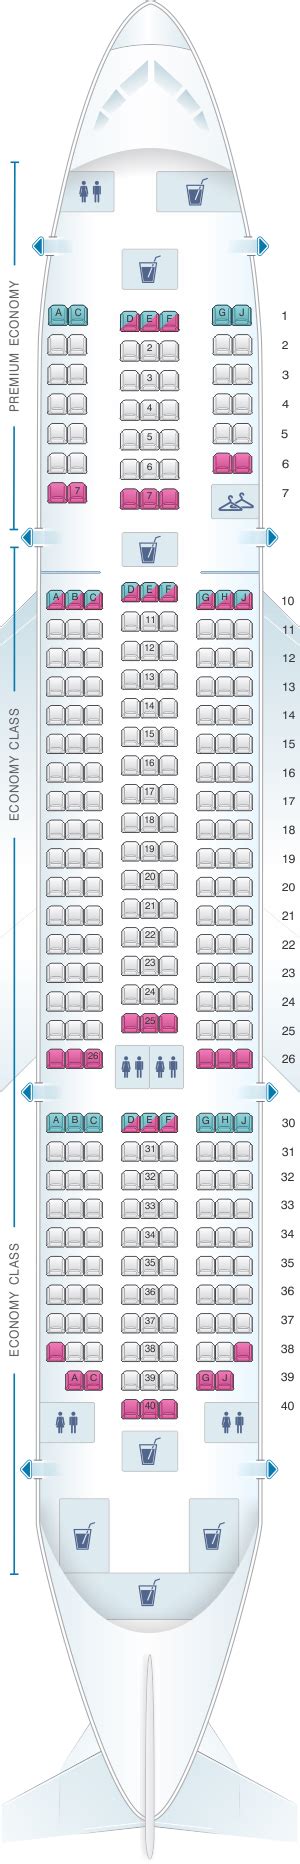 787 Dreamliner Seating Plan Review Home Decor